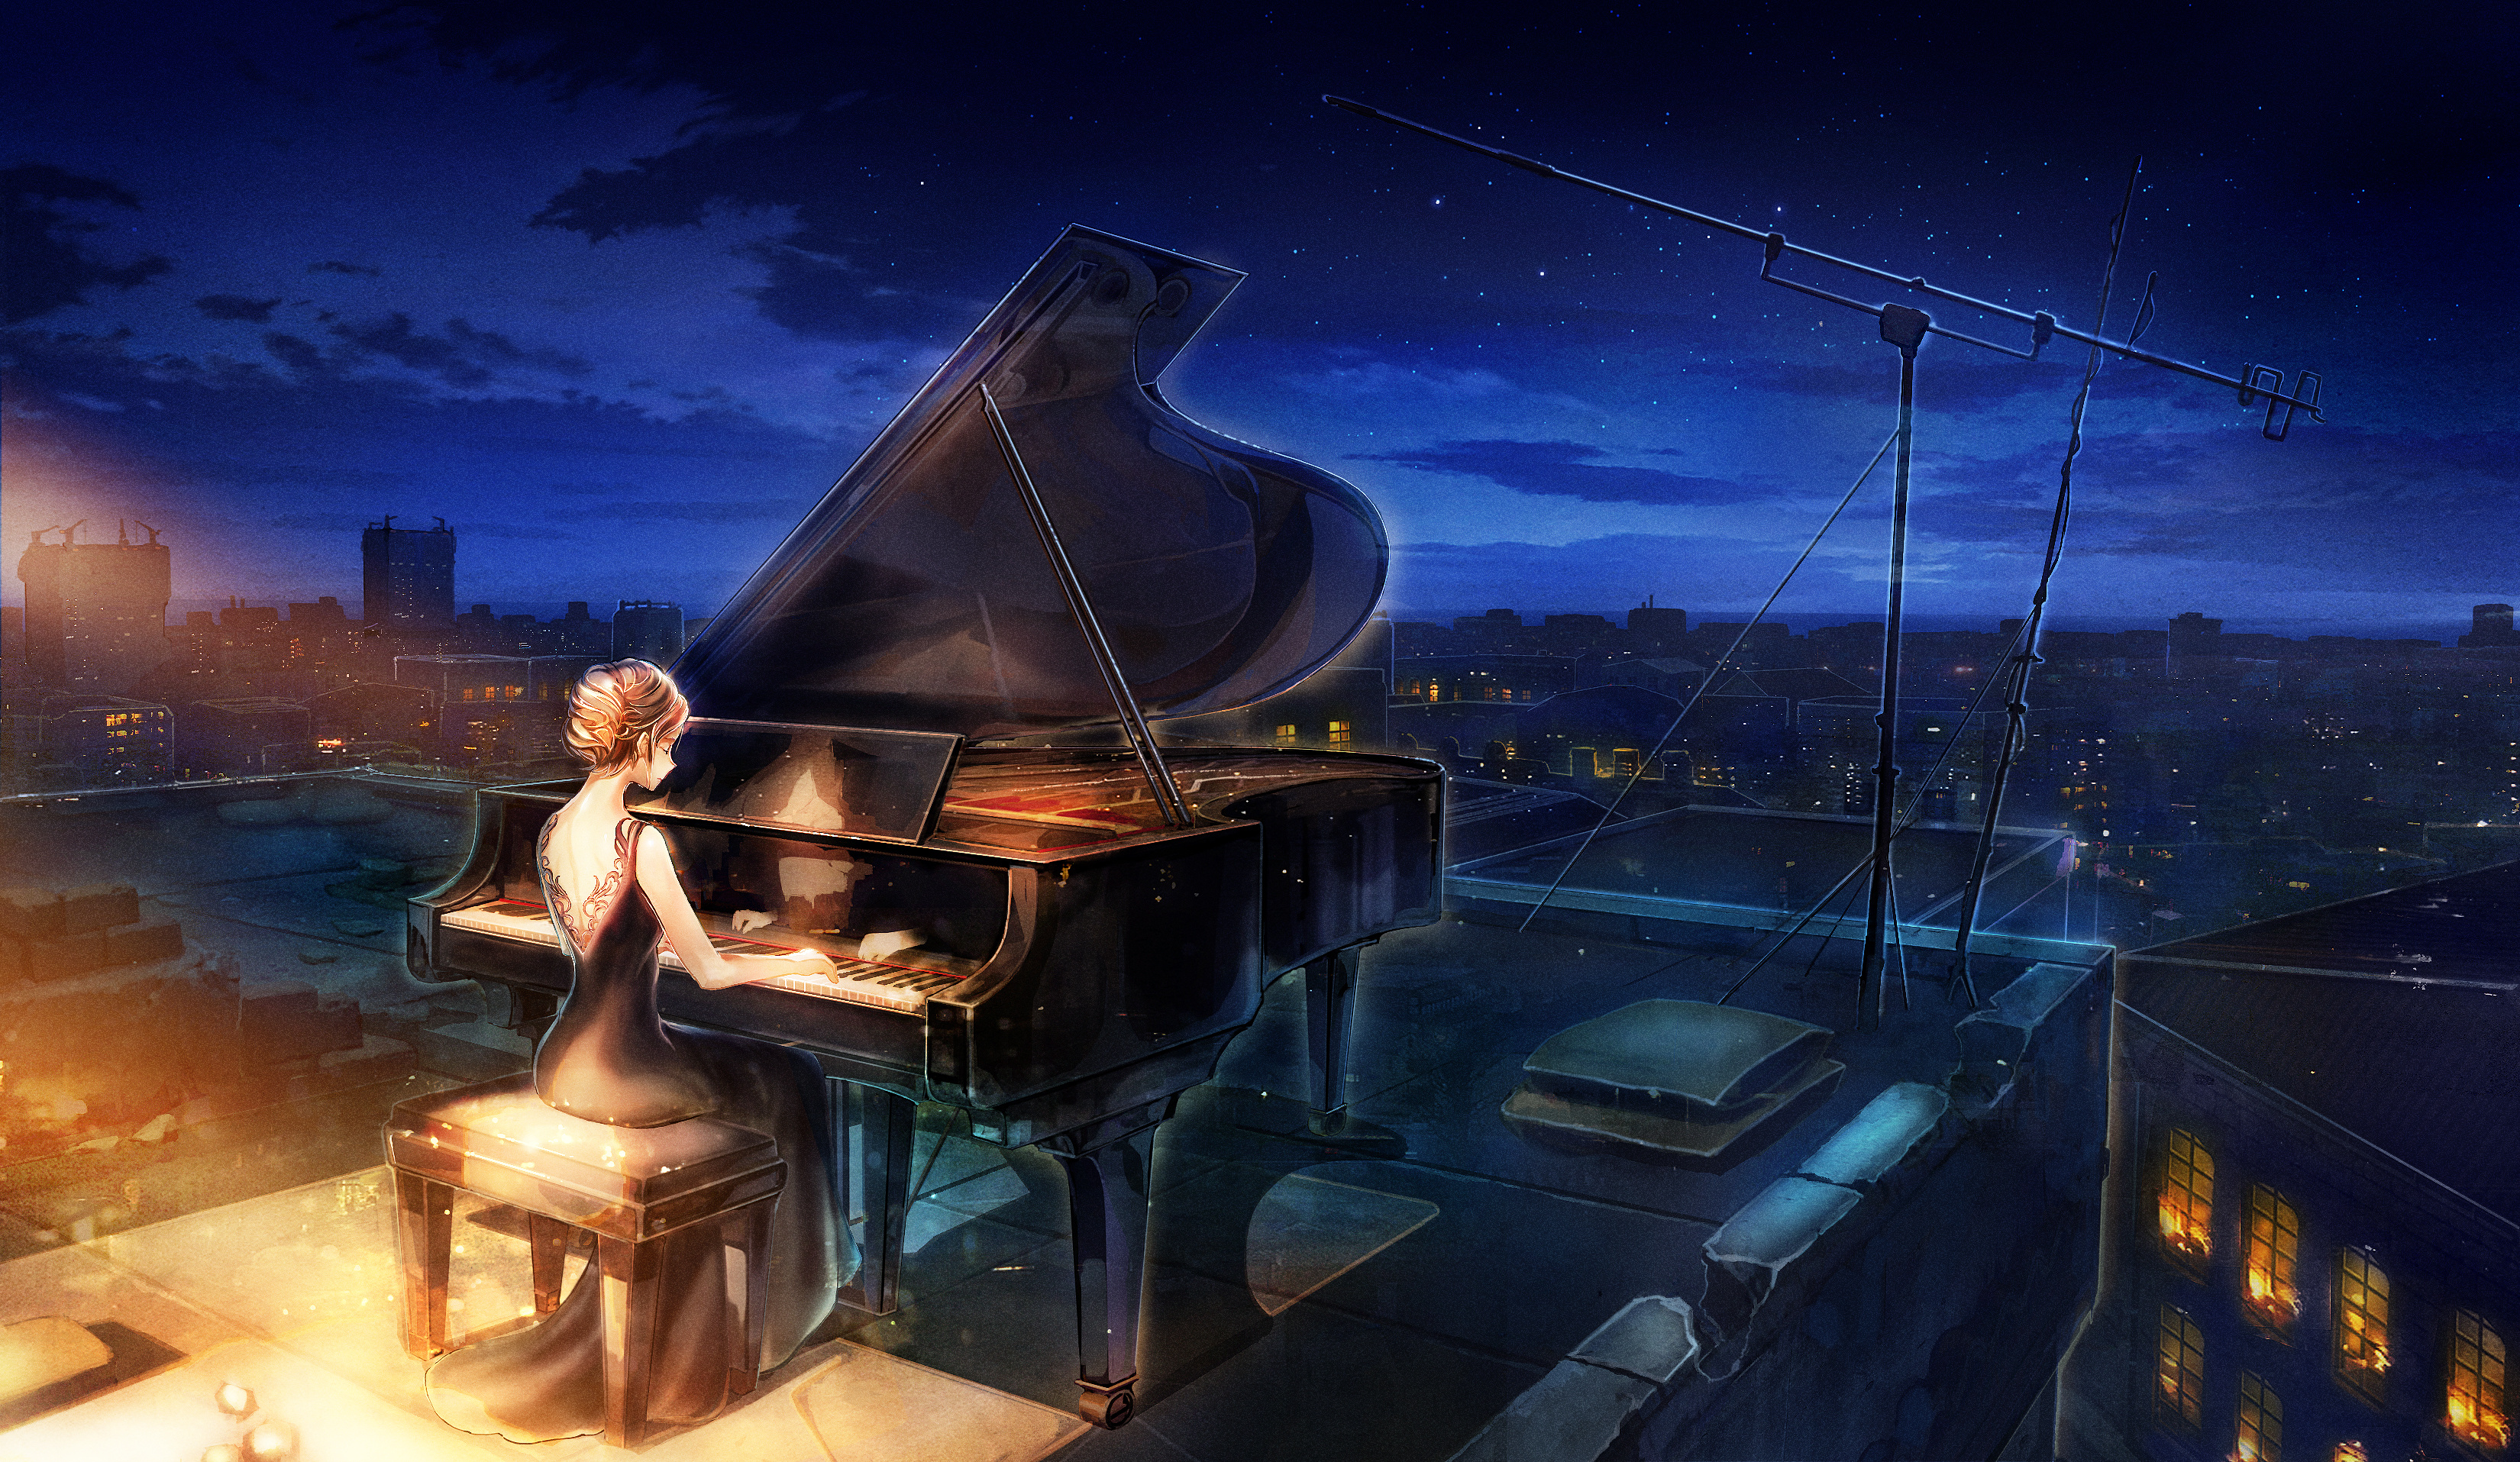 Grand Piano: Musician, Night city, Urban landscape, Music instrument with a keyboard and three pedals. 3300x1920 HD Wallpaper.